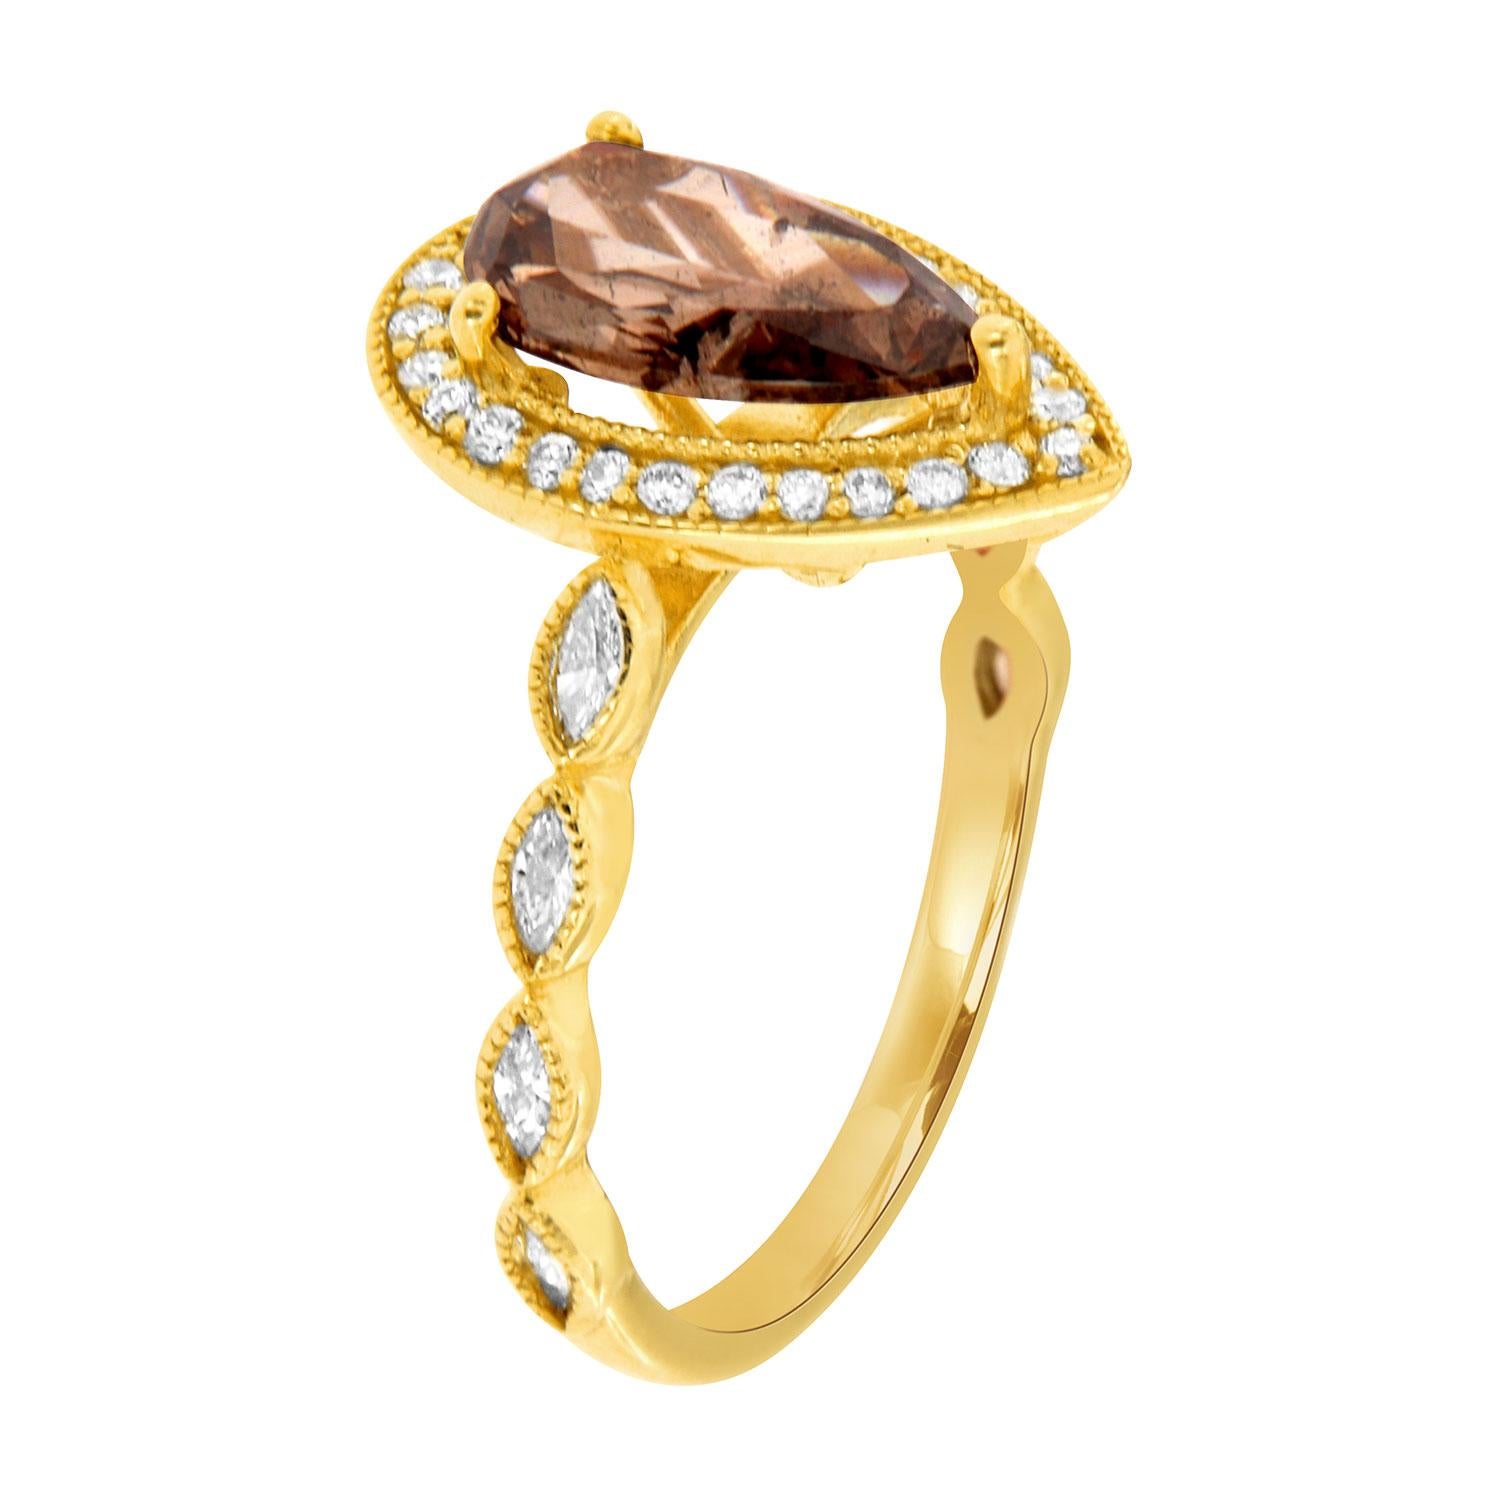 This 14k yellow gold ring features a 1.25- Carat Pear shape brilliant Champagne color Natural Diamond encircled by a Milgrain designed halo of brilliant round diamonds on top of a 2.2 MM wide Marquises shape diamond band.
This unique diamond